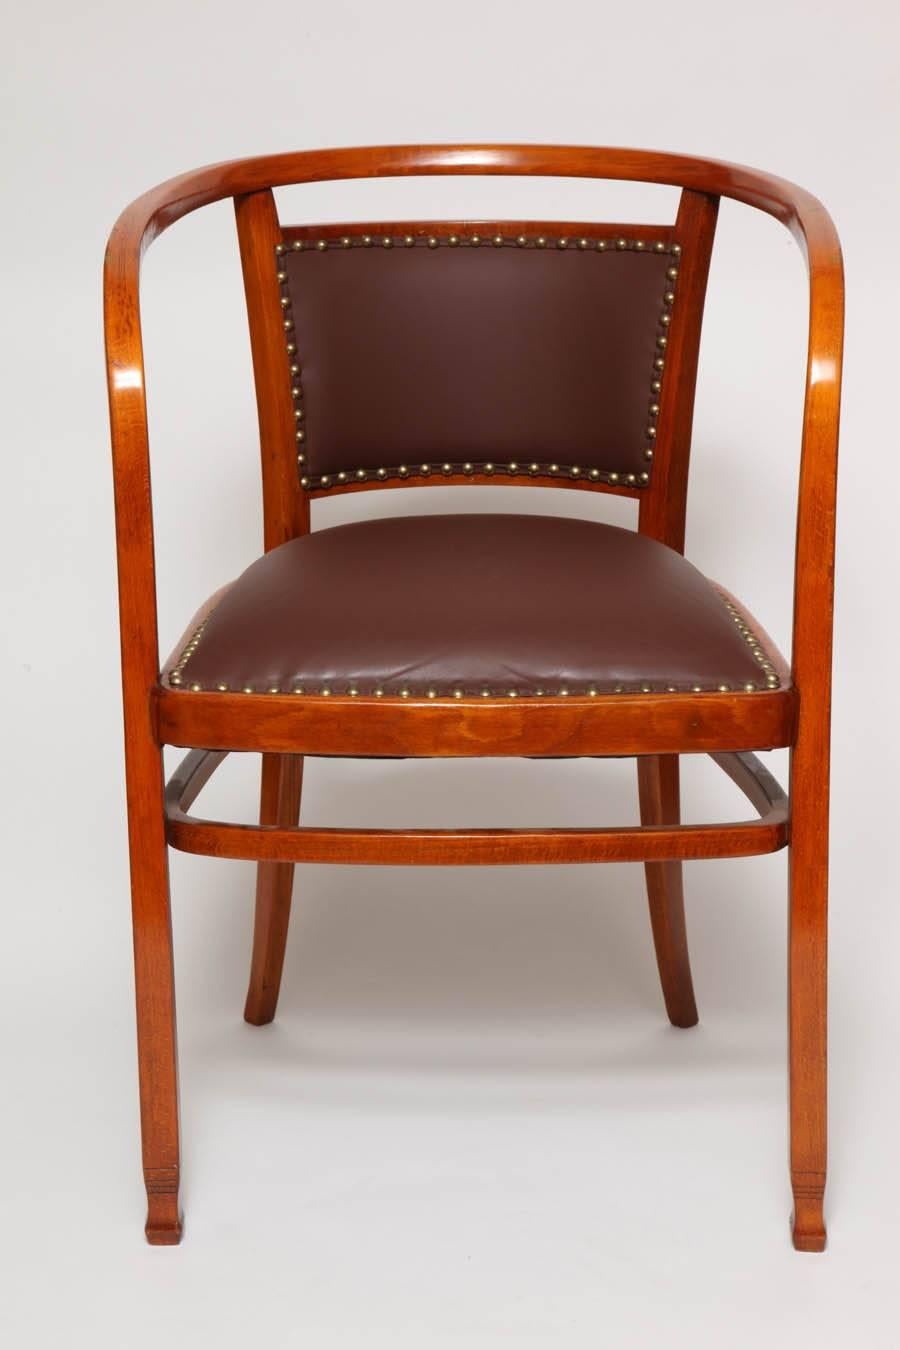 Beech Otto Wagner Secessionist Bentwood and Leather Armchair, J&J Kohn, 1906 For Sale